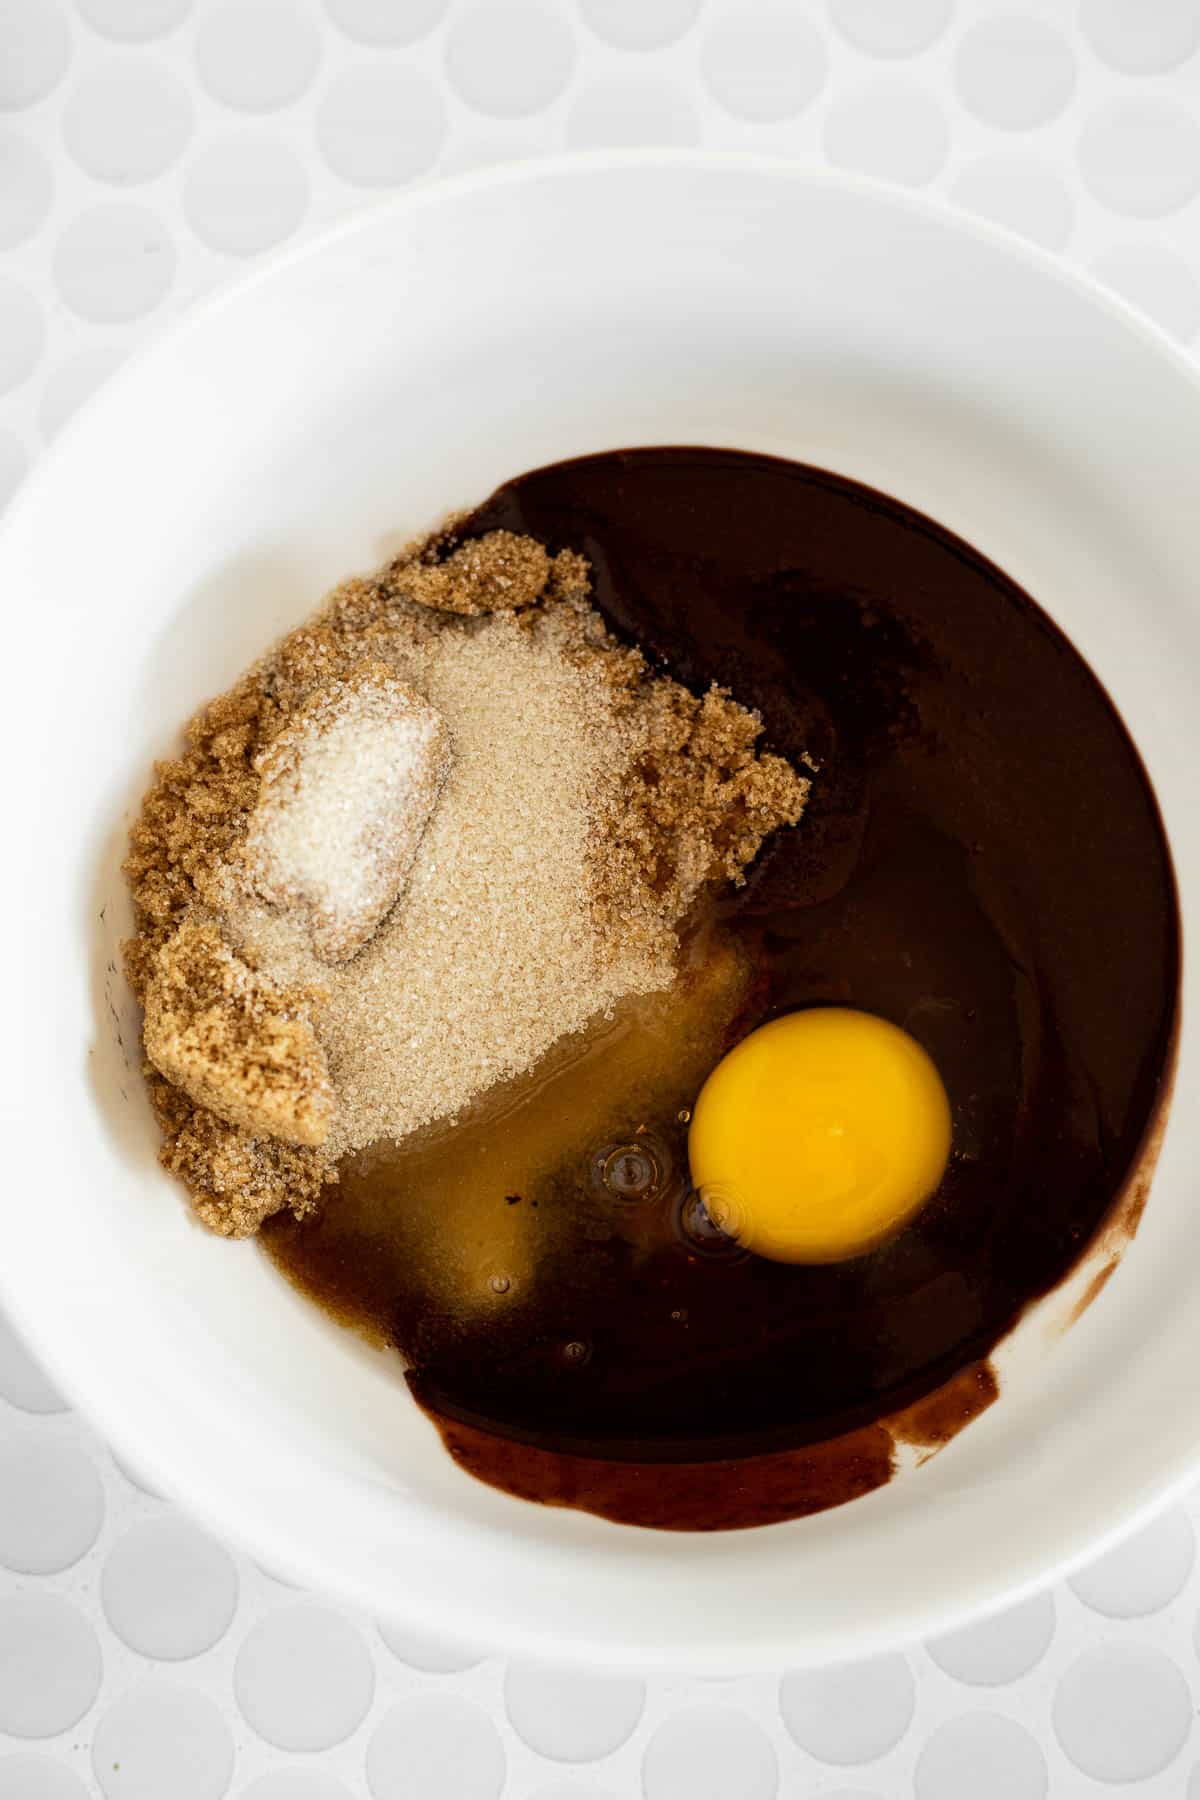 brown sugar, granulated sugar, and an egg in a white bowl of melted chocolate.